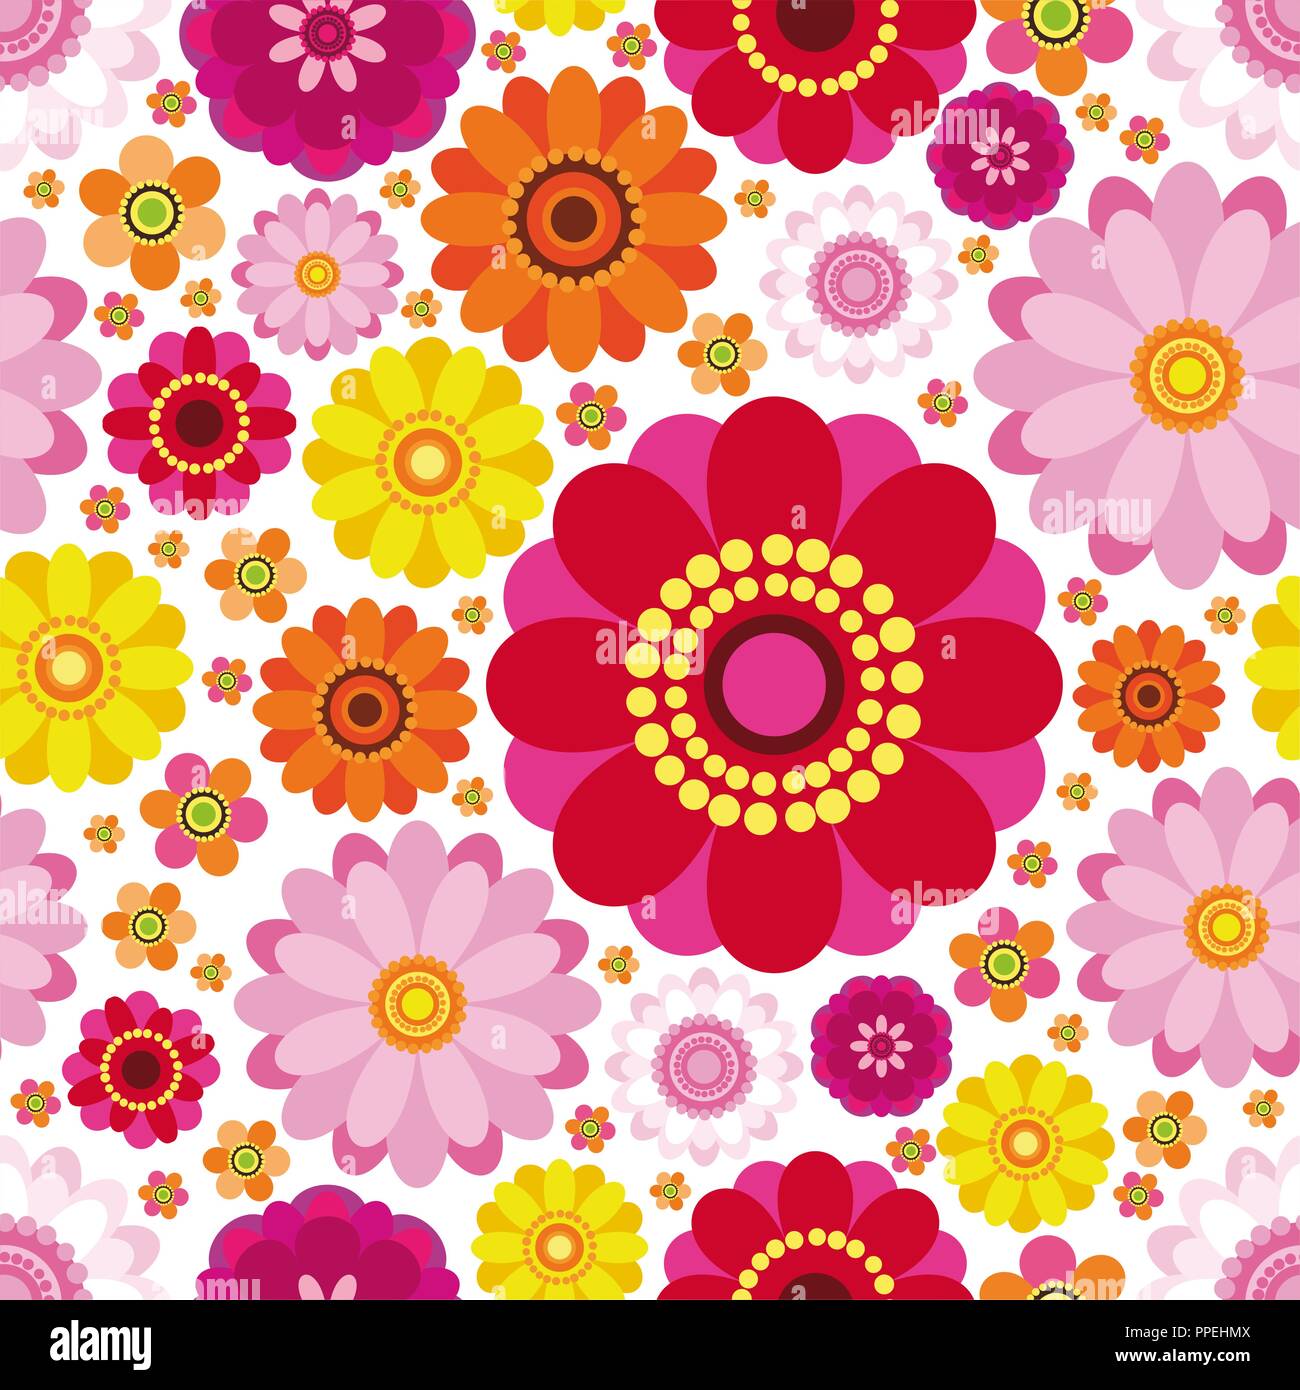 Easter floral background - an illustration for your design project. Stock Vector